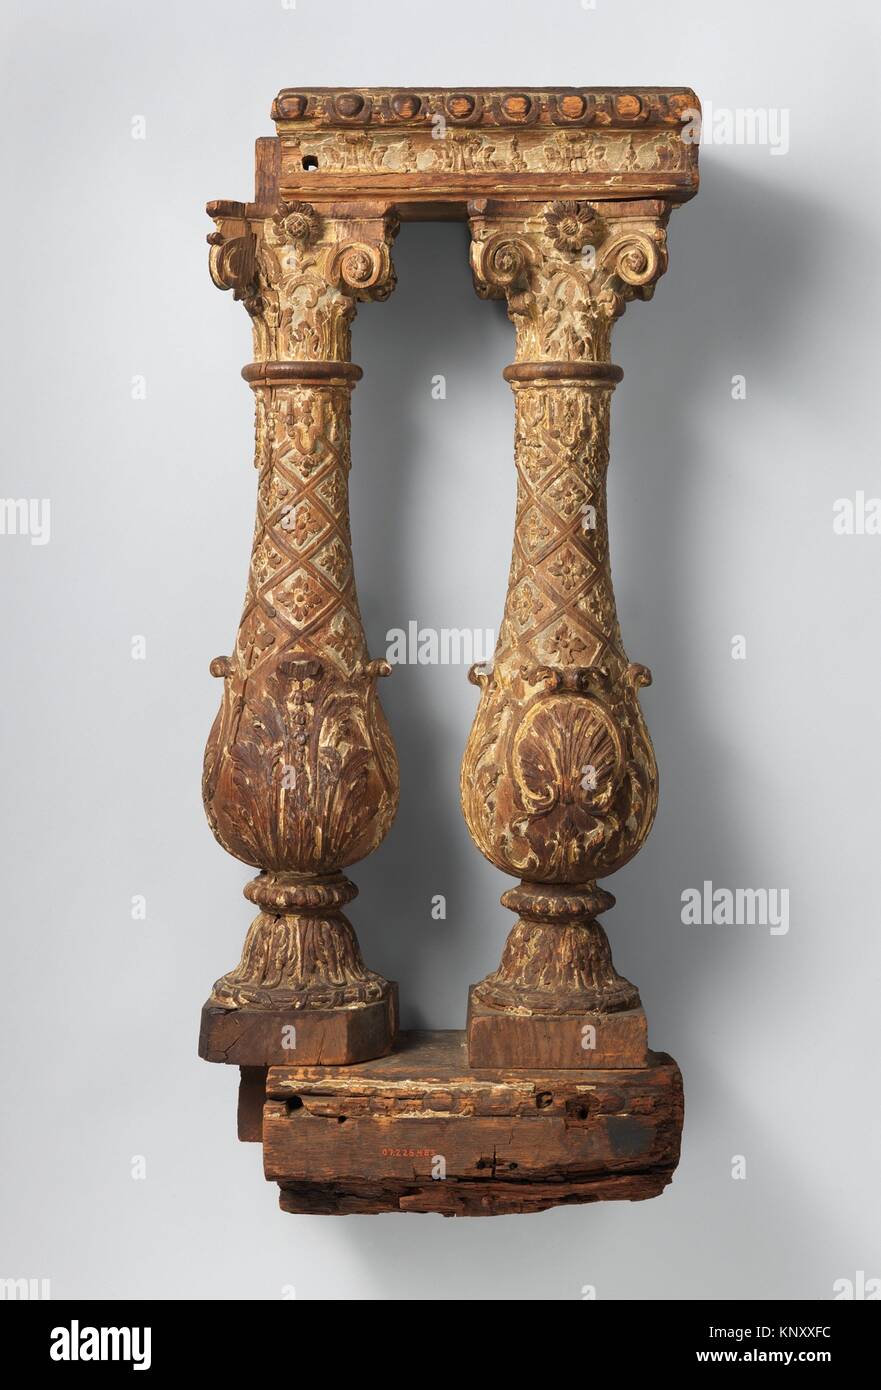 Pair of balusters. Date: late 17th century; Culture: French; Medium: Carved and originally painted and gilded, oak; Dimensions: Height (each): 34 in. Stock Photo